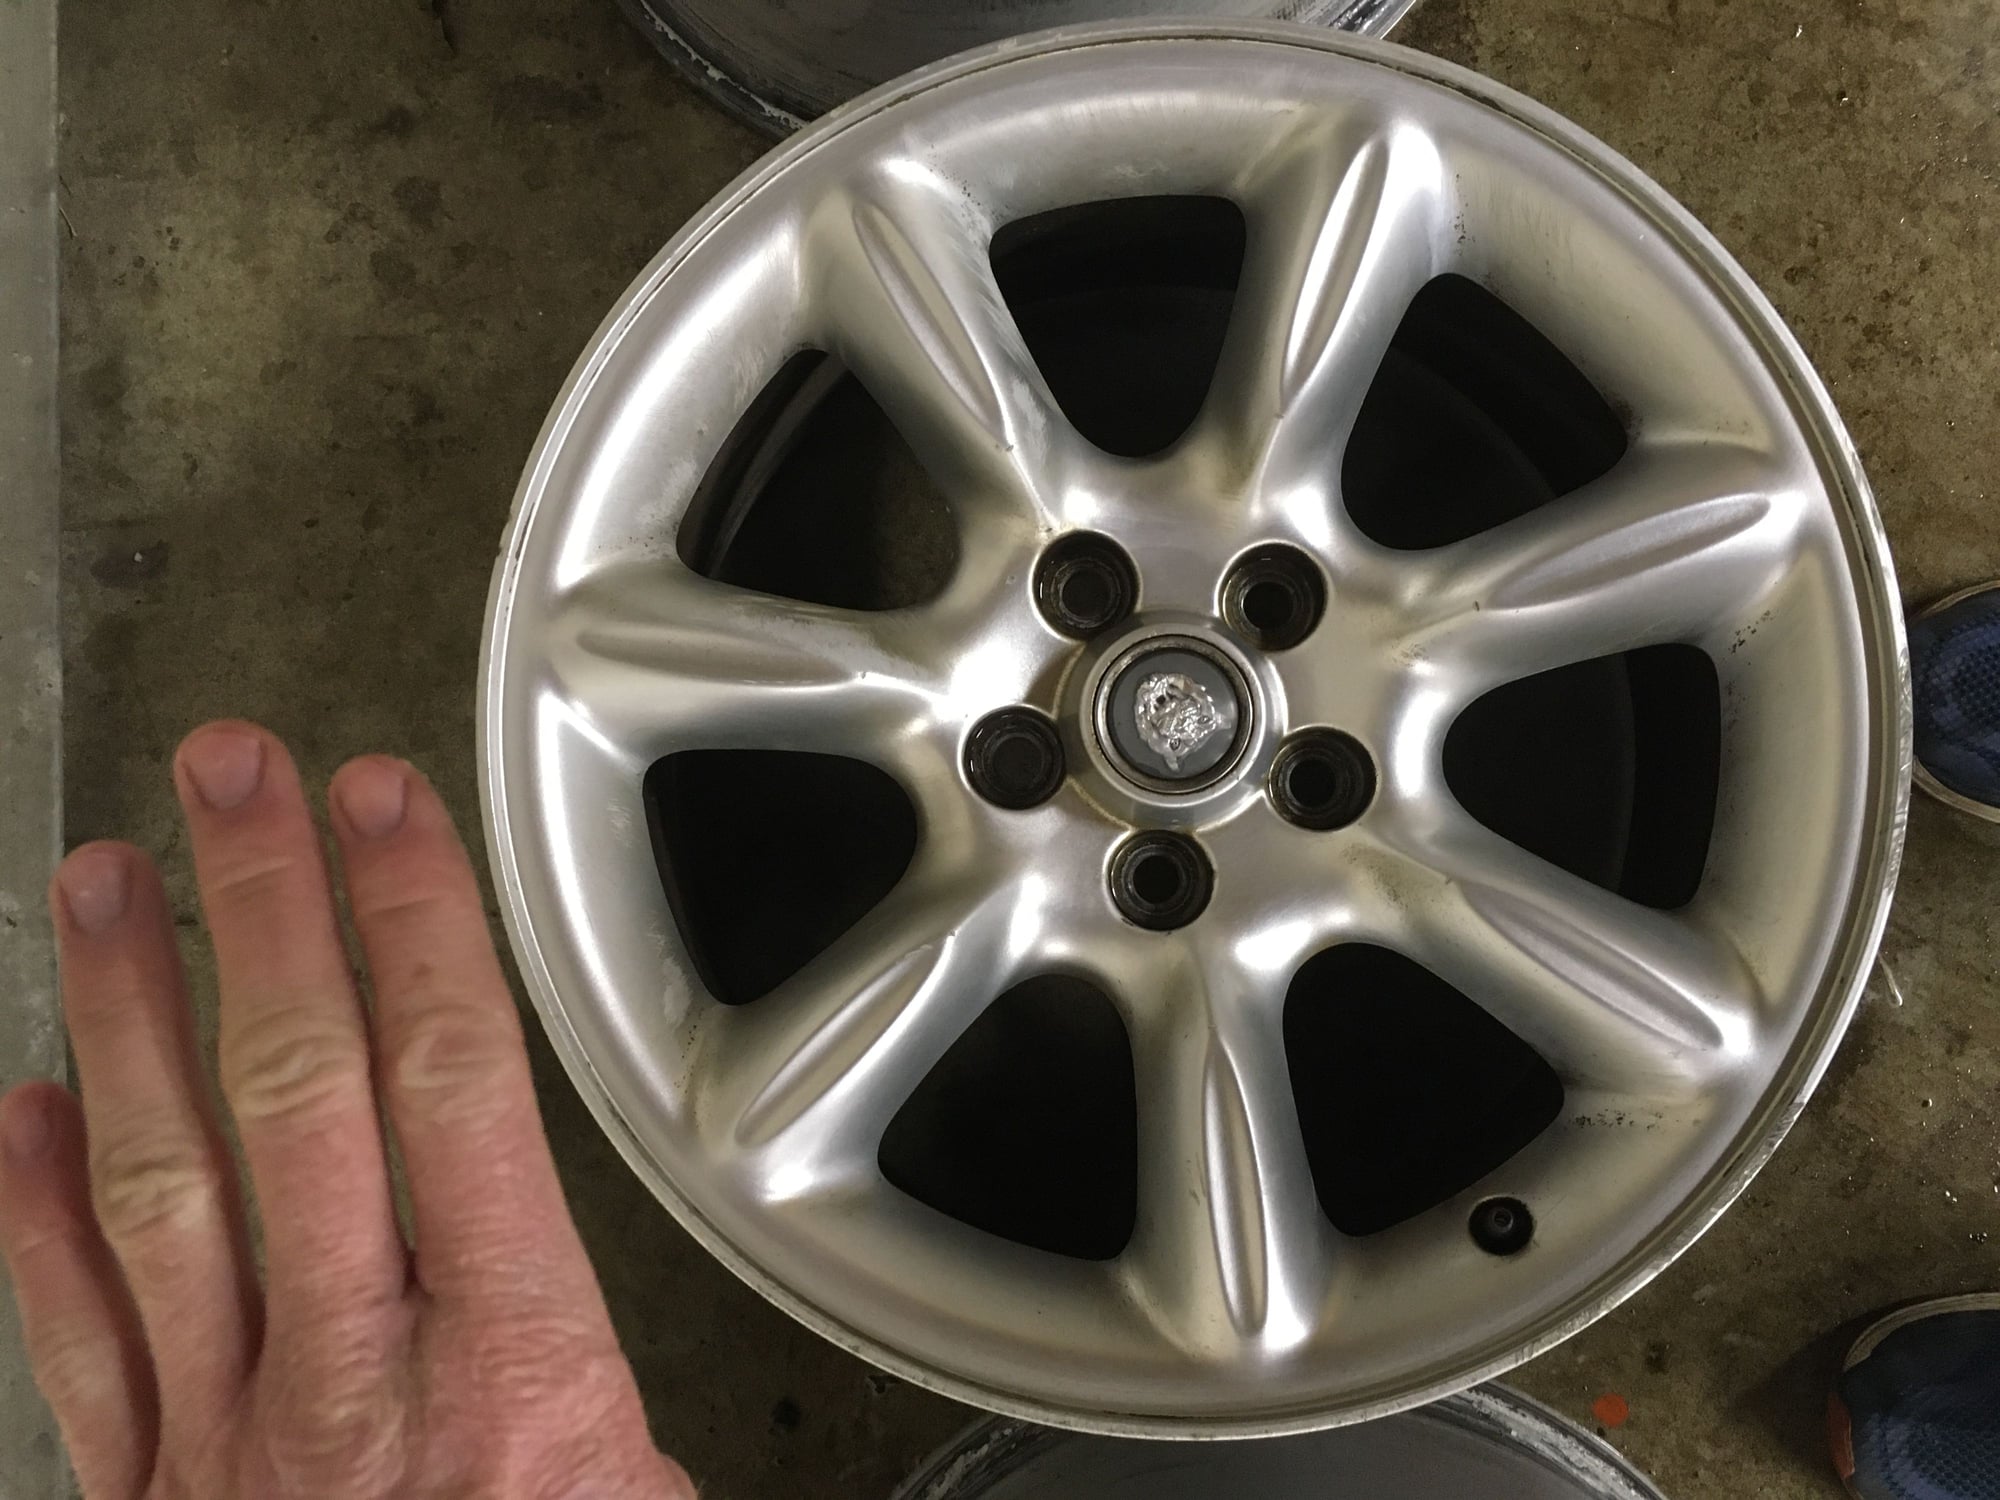 Wheels and Tires/Axles - Jaguar Asteroid Wheels (2000 XJR) - Used - 1997 to 2003 Jaguar XJR - Holly, MI 48442, United States